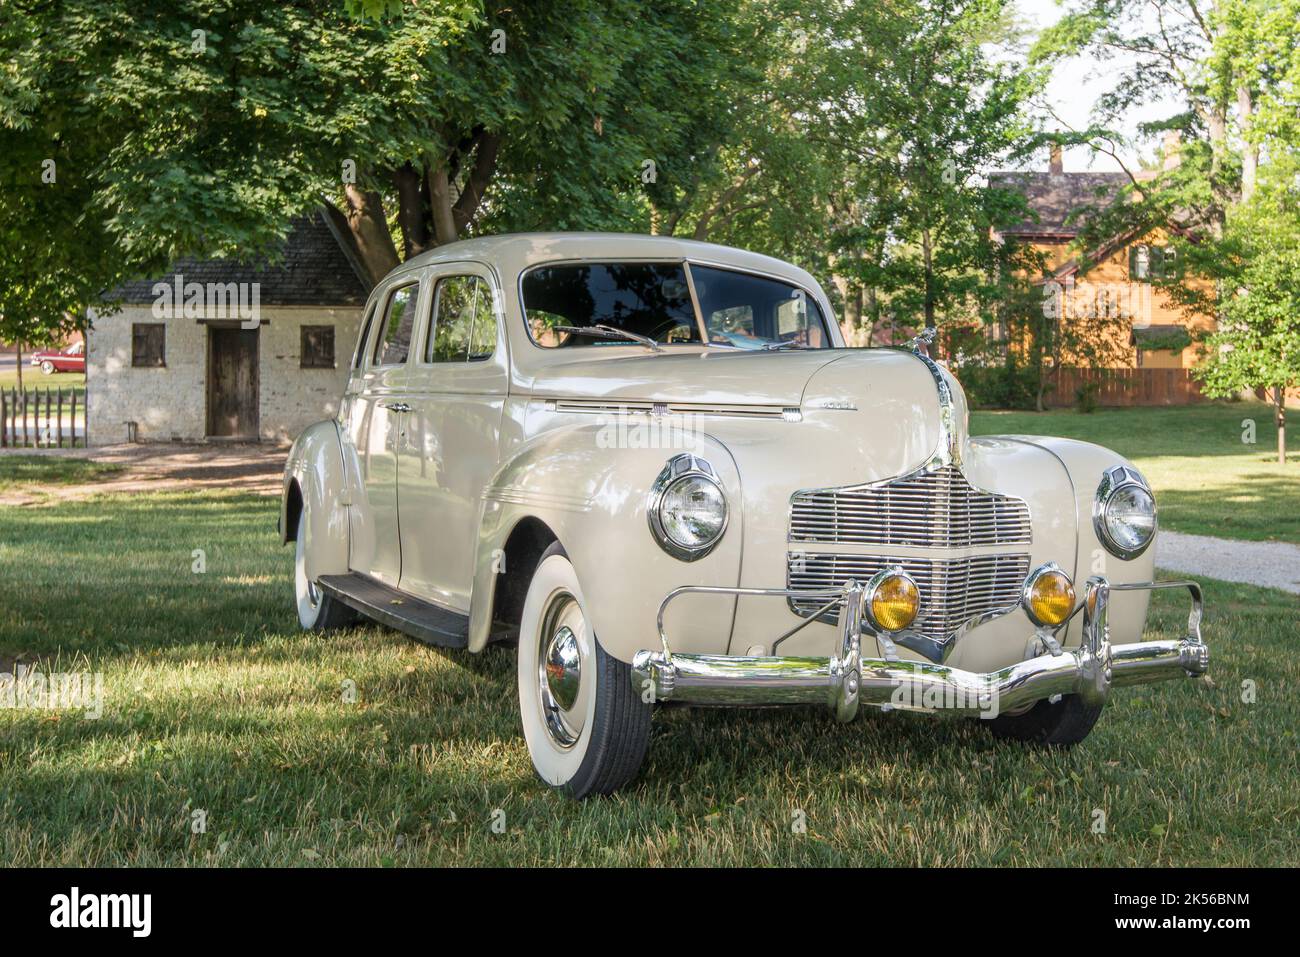 DEARBORN, MI/USA - JUNE 17, 2017: A 1940 Dodge Luxury Liner Deluxe car at The Henry Ford (THF) Motor Muster car show, Greenfield Village, near Detroit. Stock Photo